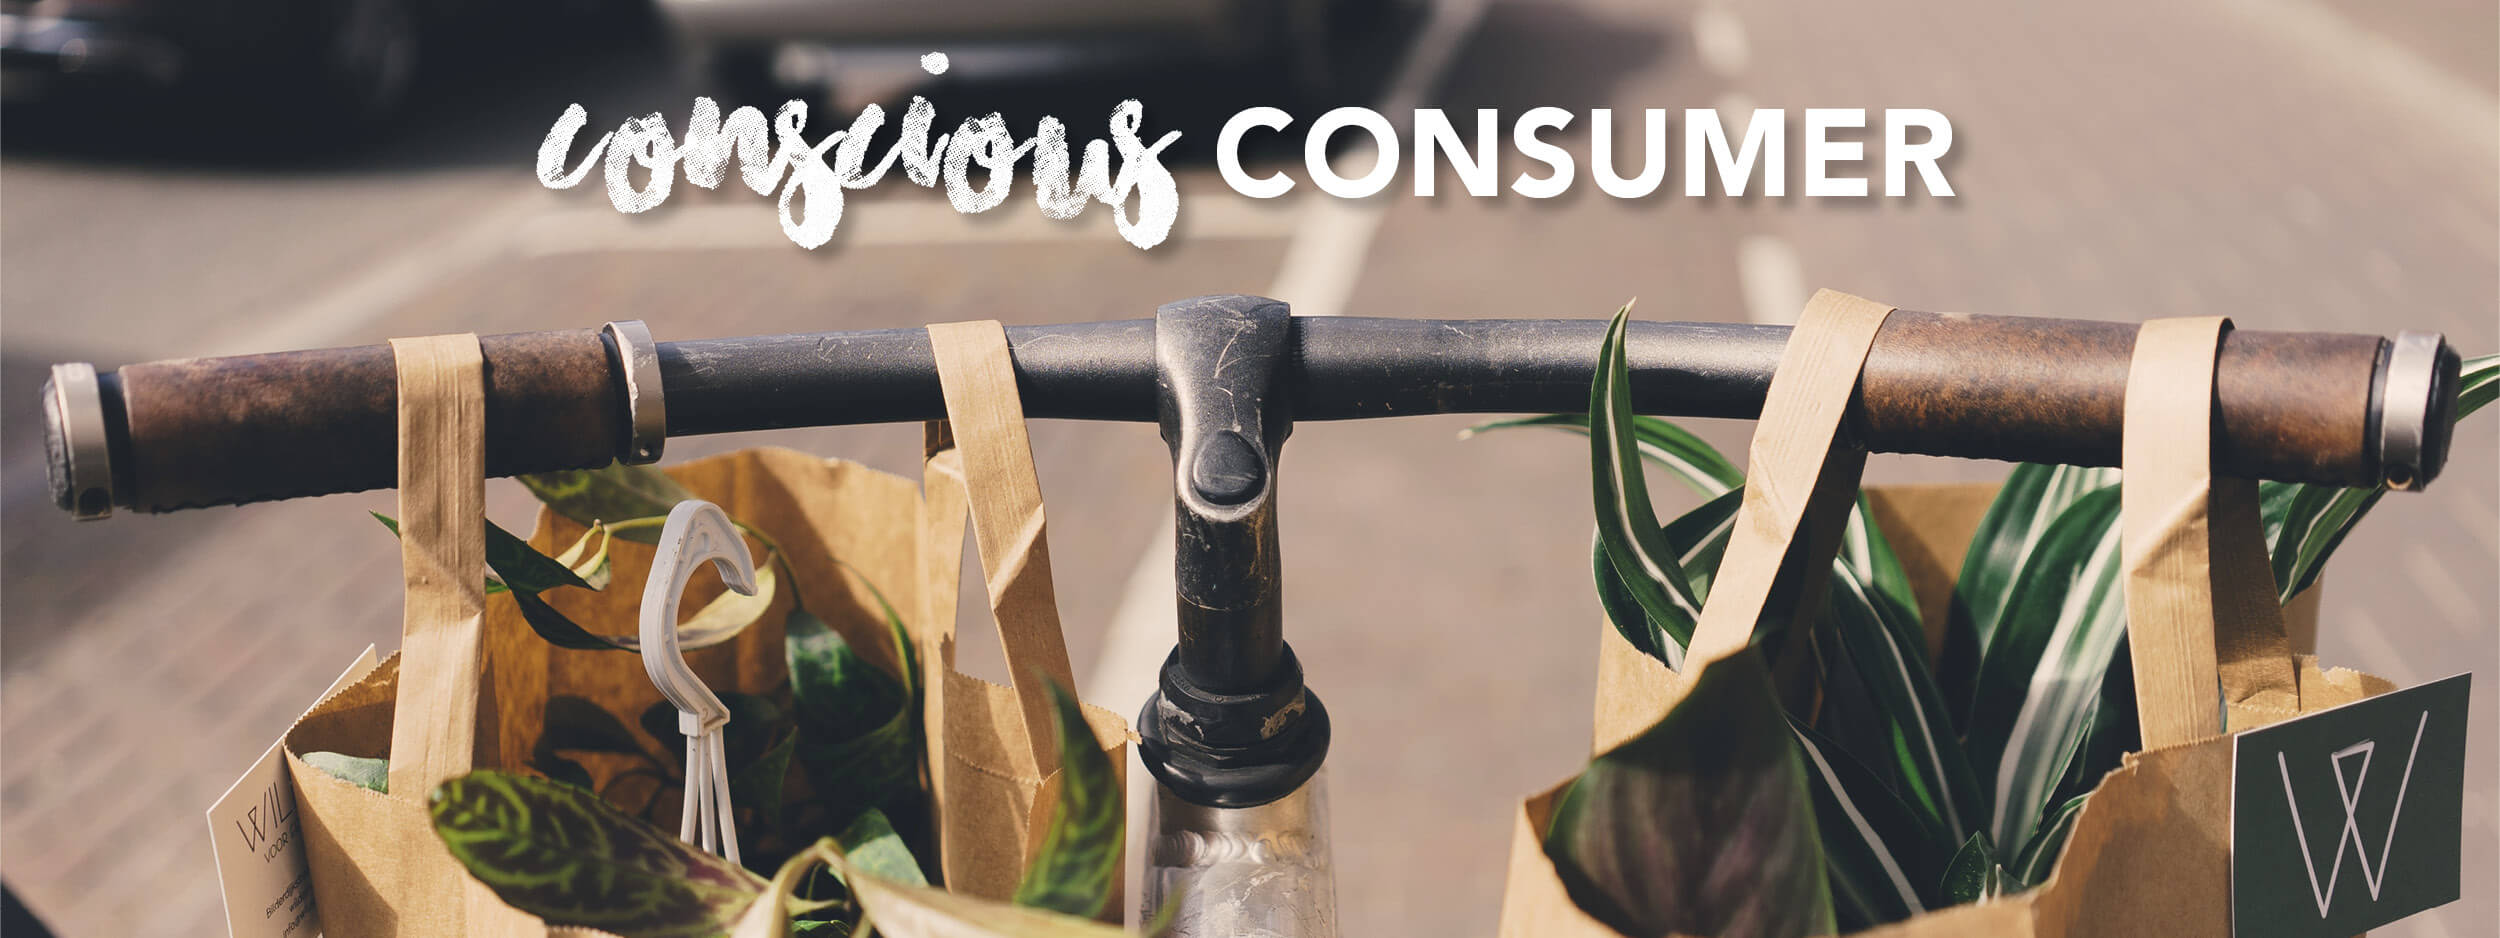 How to Be a More Conscious Consumer